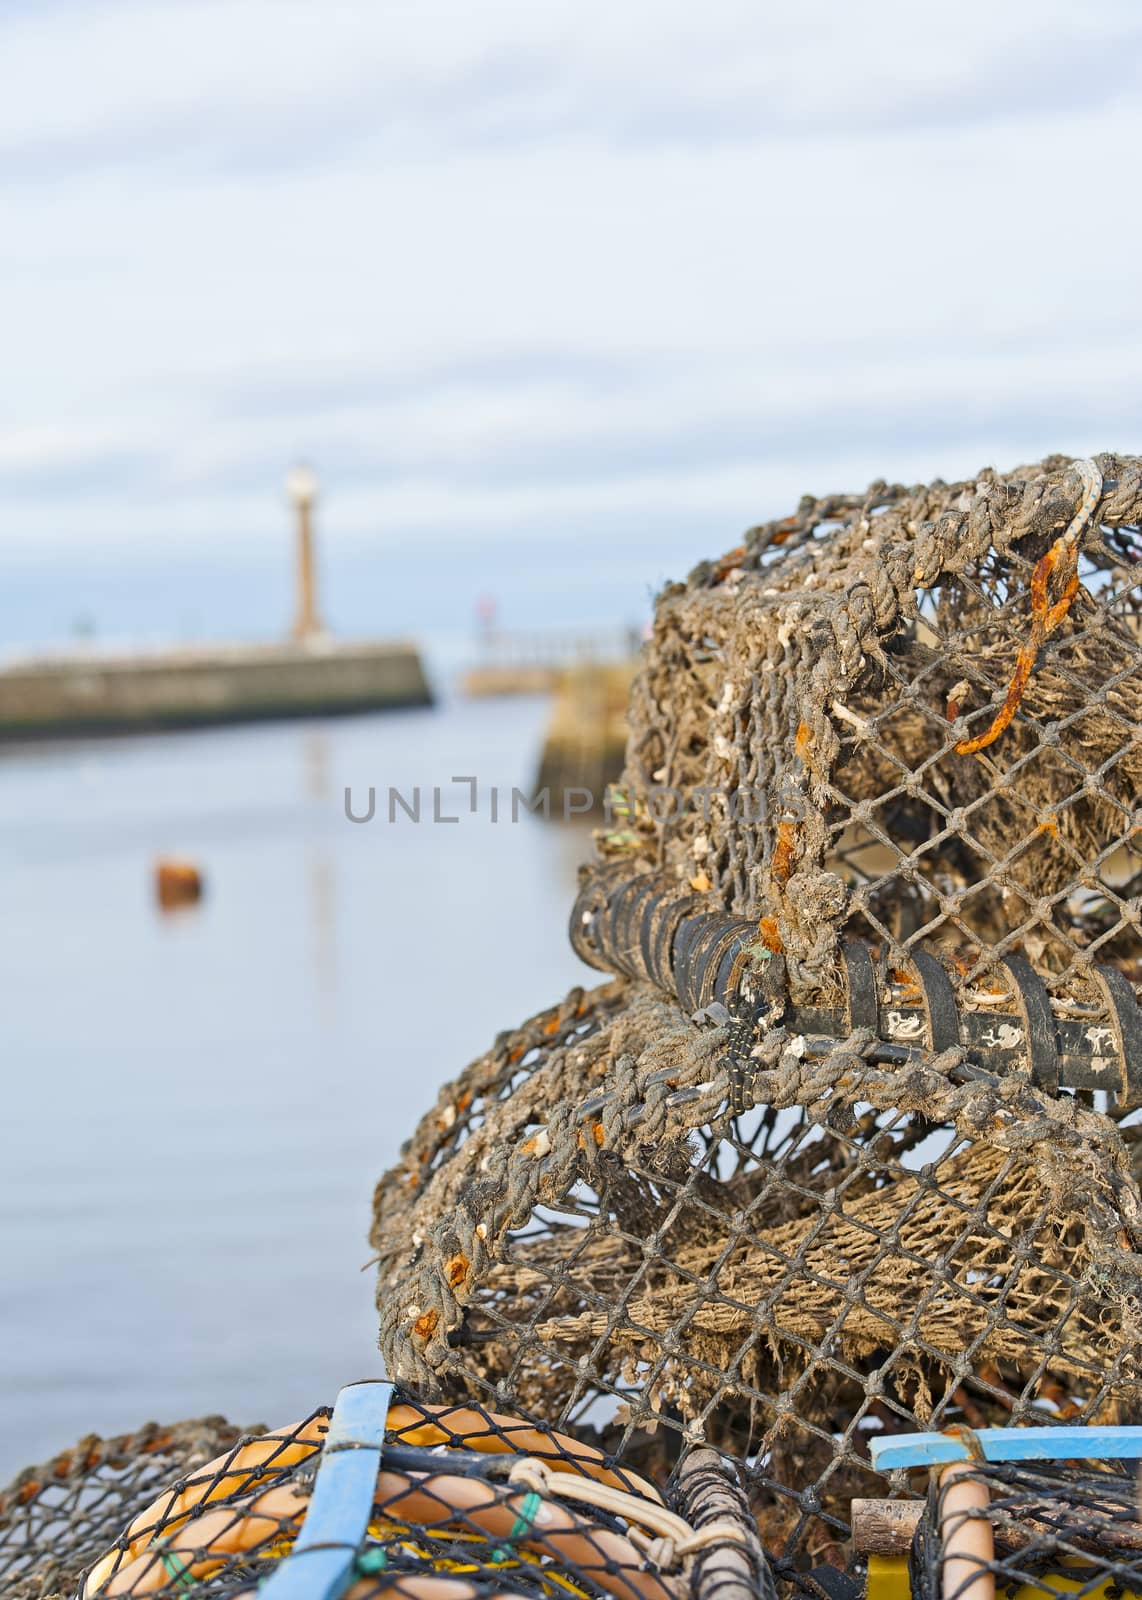 Closeup detail of lobster pots on a harbor quayside